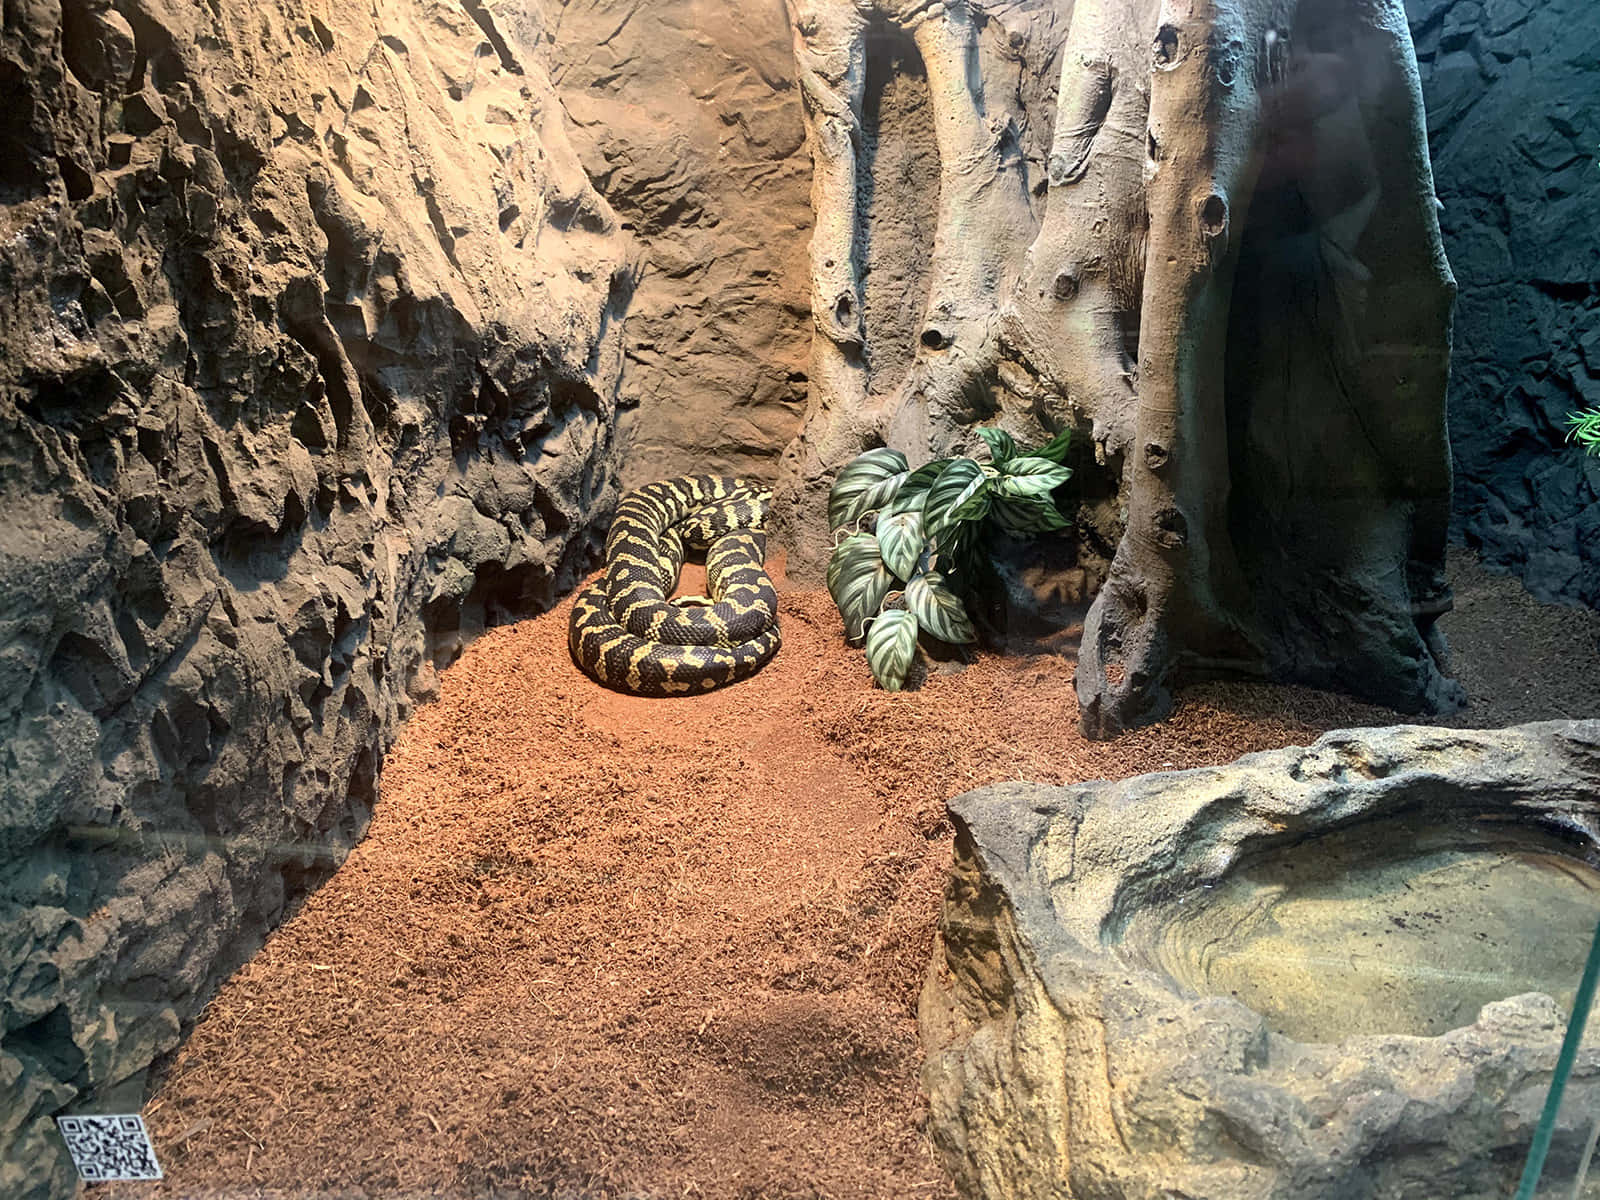 A Snake Is Sitting In A Zoo Enclosure